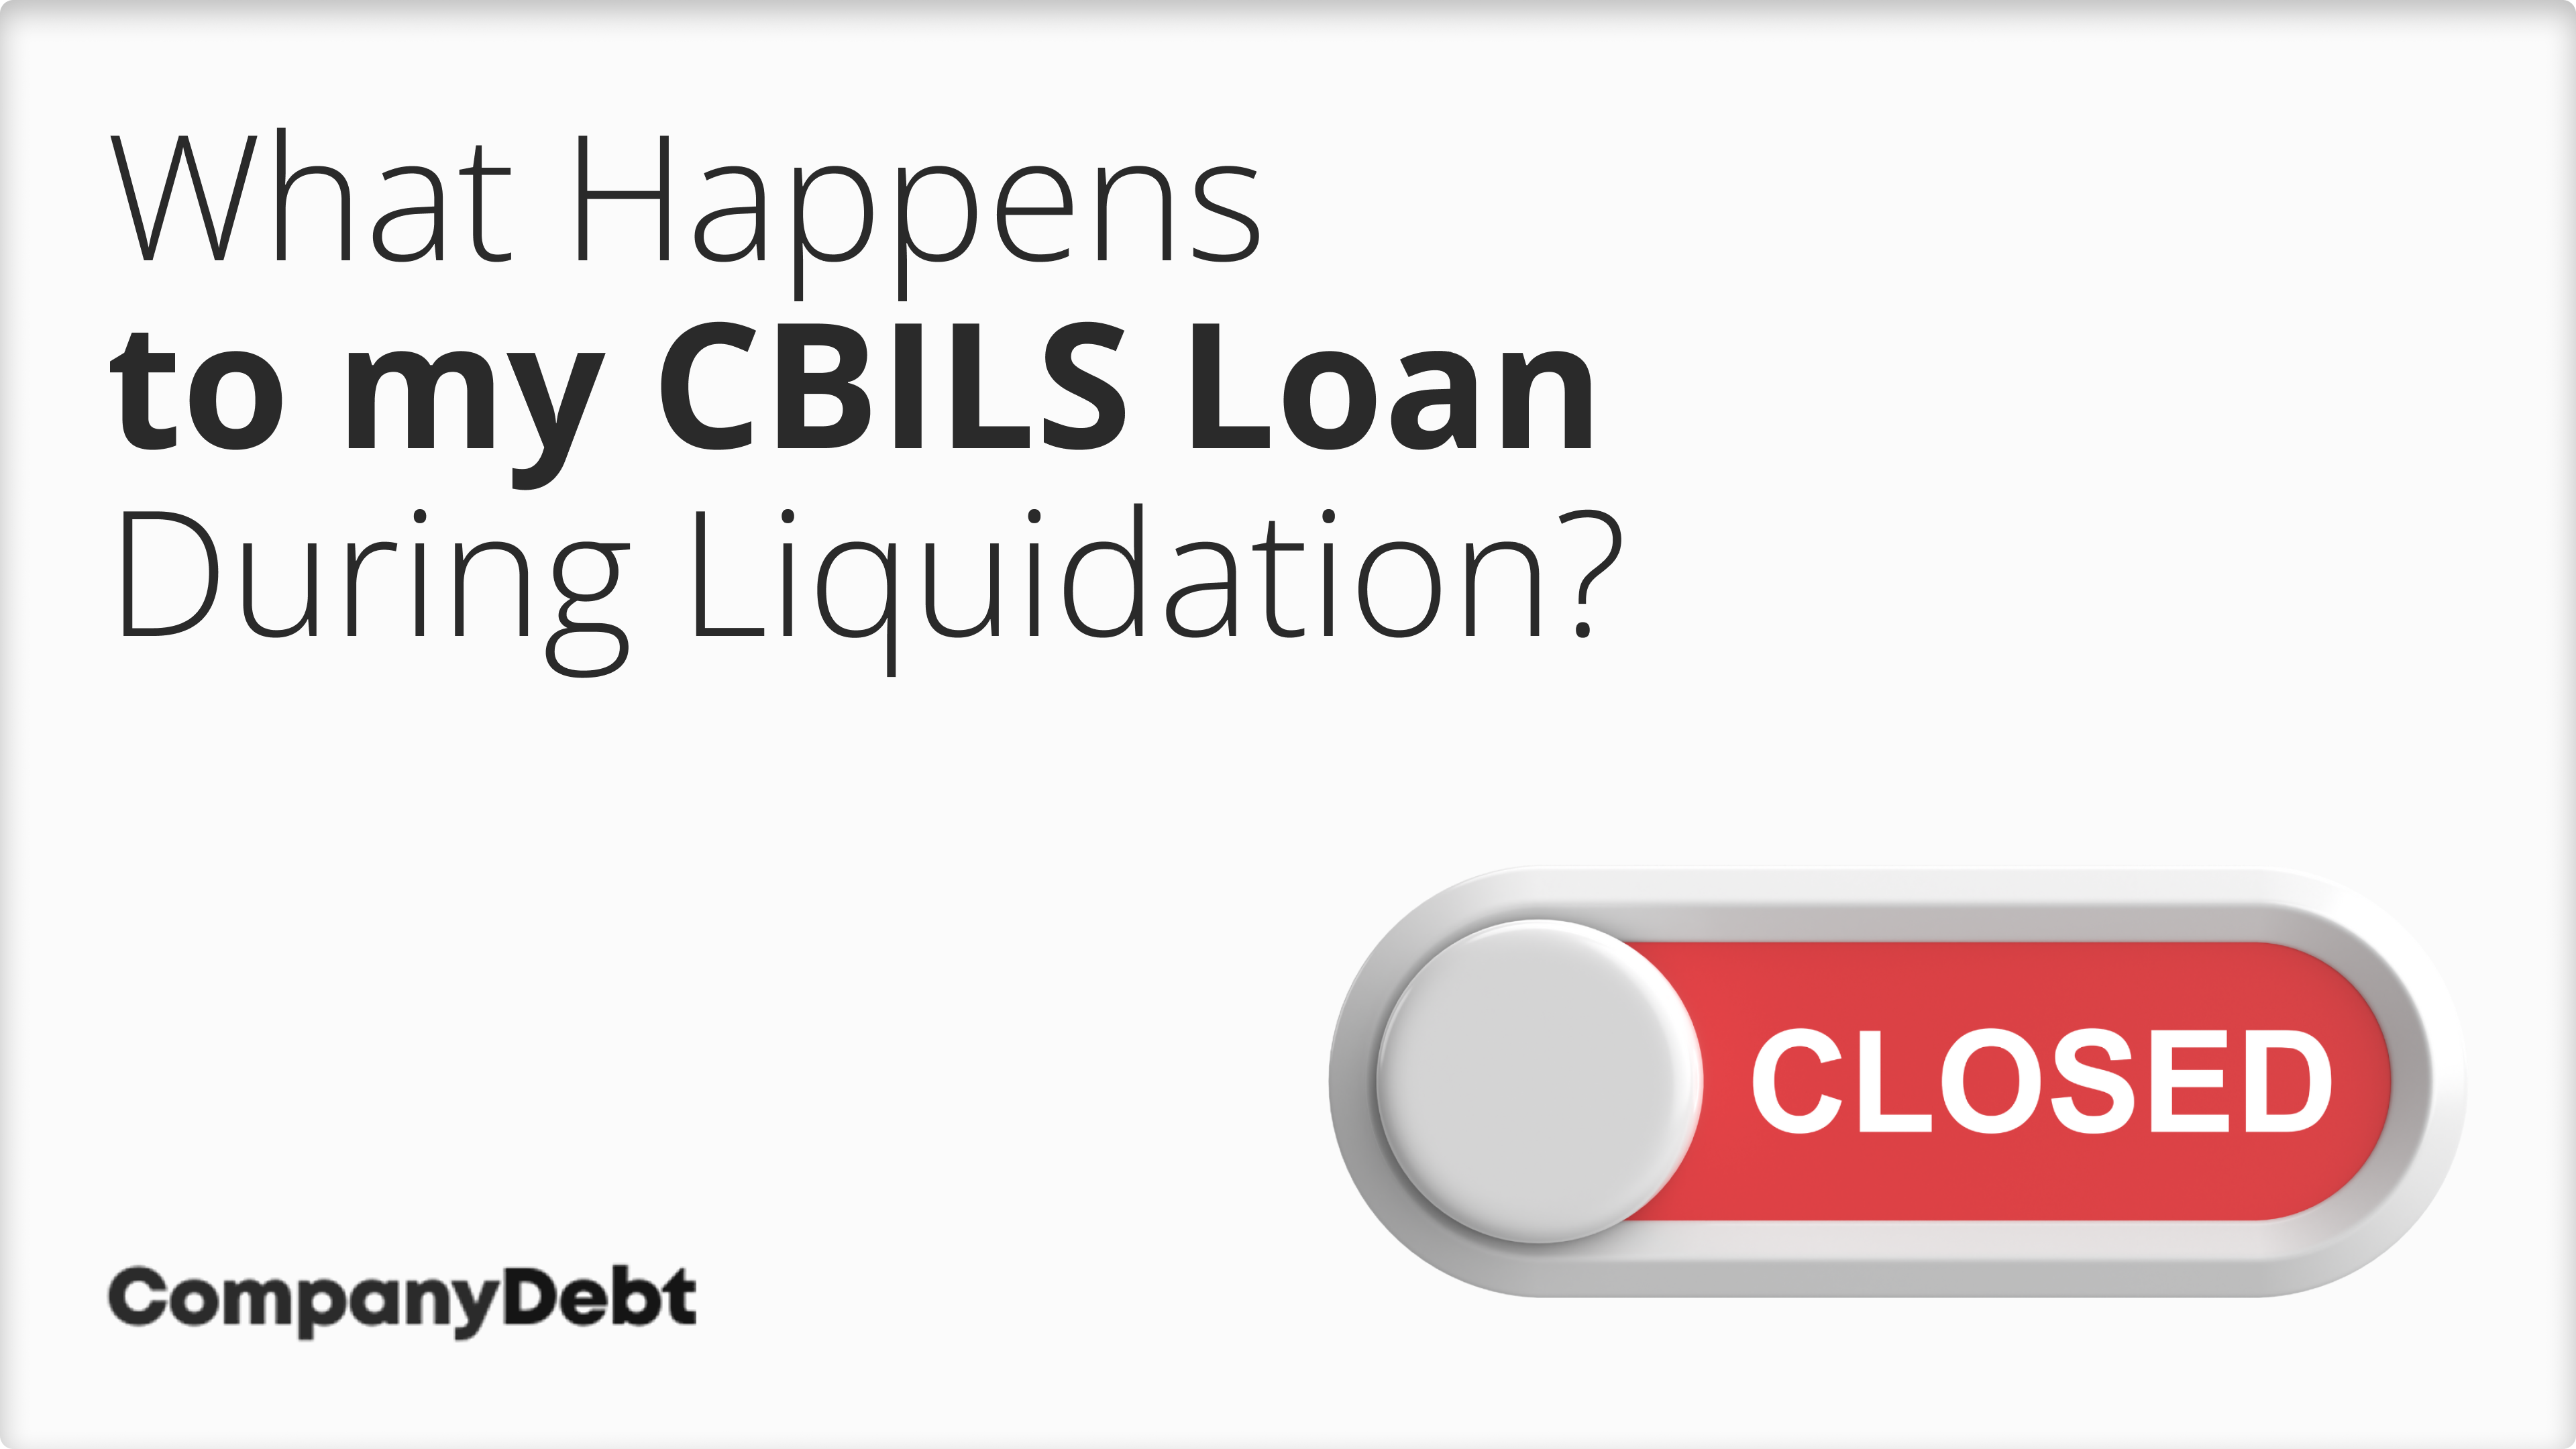 What-Happens-to-my-CBILS-Loan-During-Liquidation_